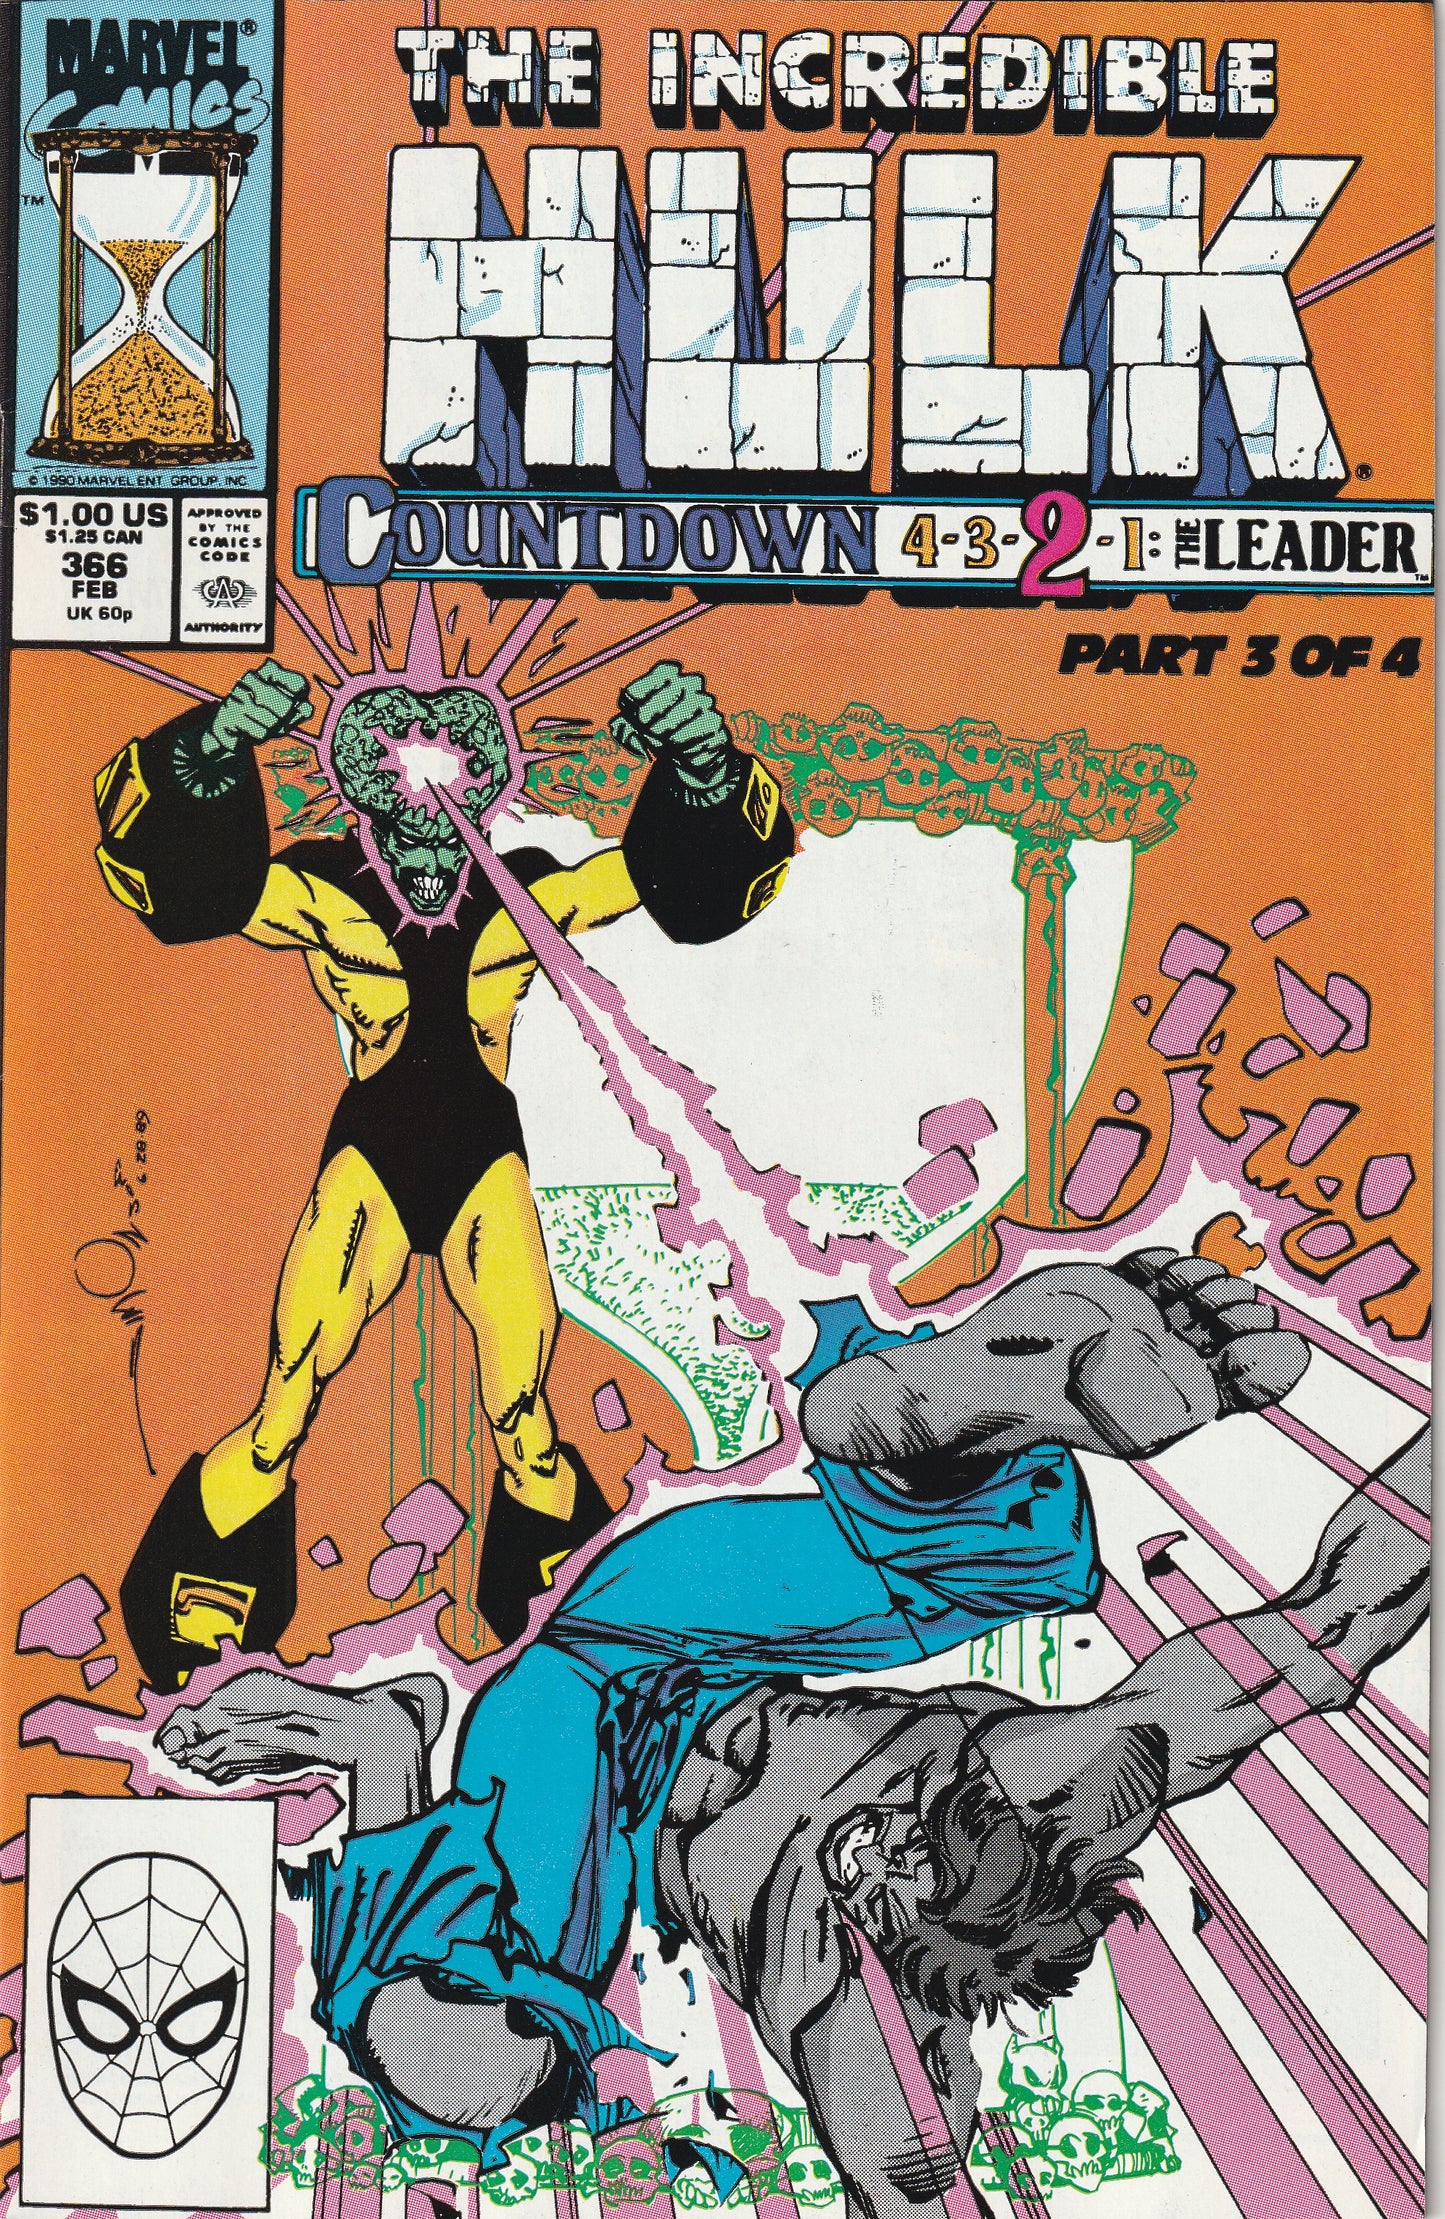 Incredible Hulk #366 (1990) - 1st Appearance of Riot Squad